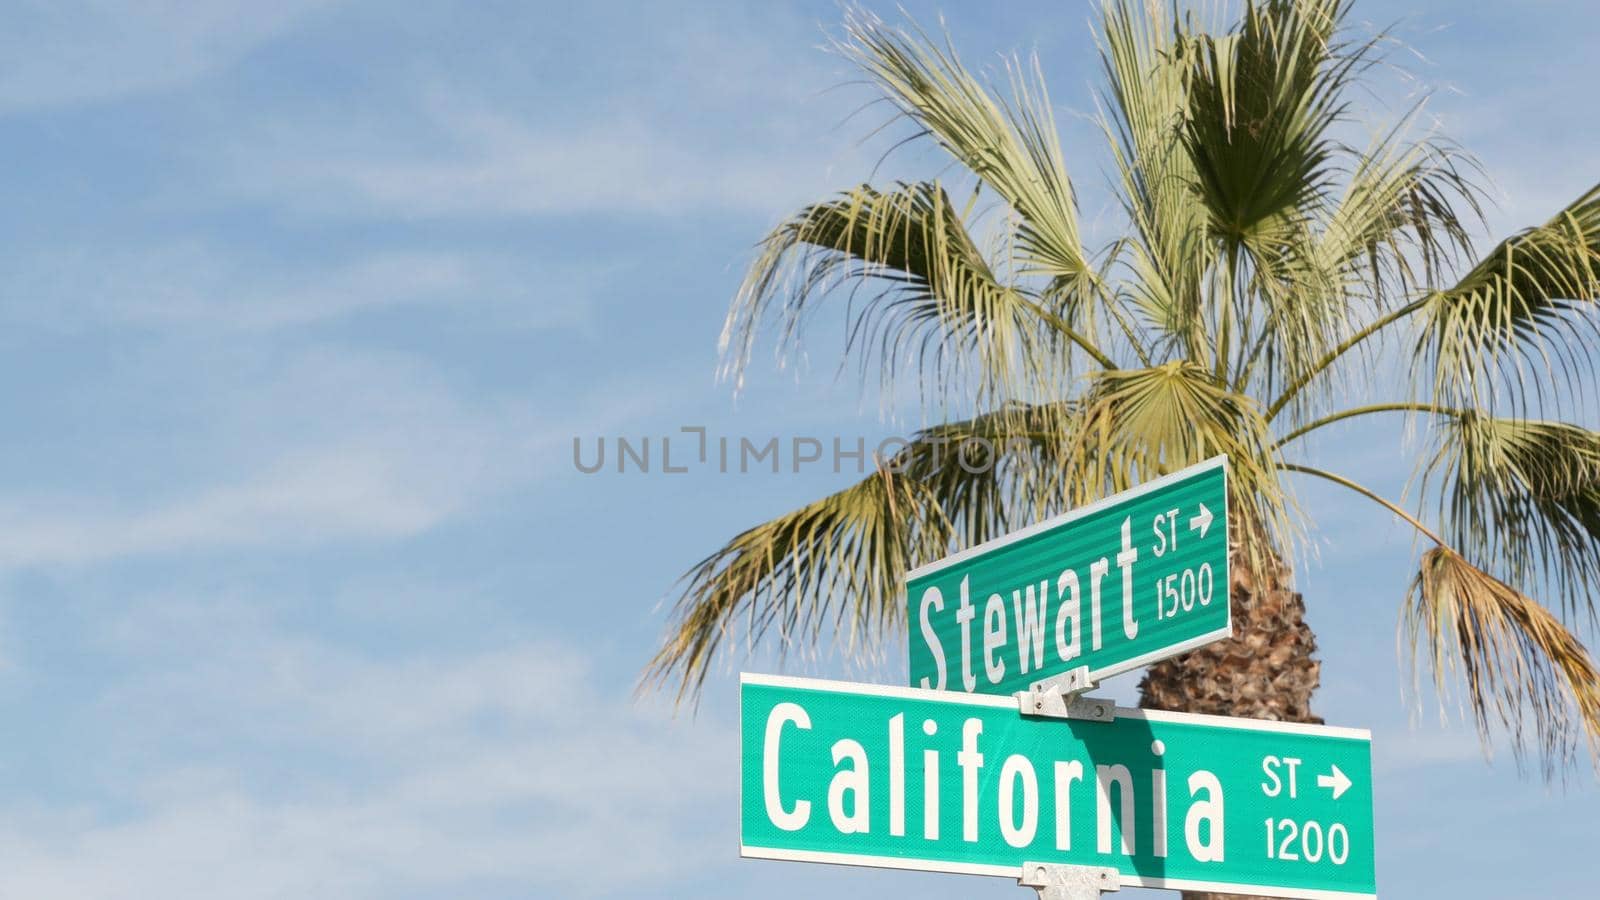 California street road sign on crossroad. Lettering on intersection signpost, symbol of summertime travel and vacations. USA tourist destination. Text on nameboard in city near Los Angeles, route 101.